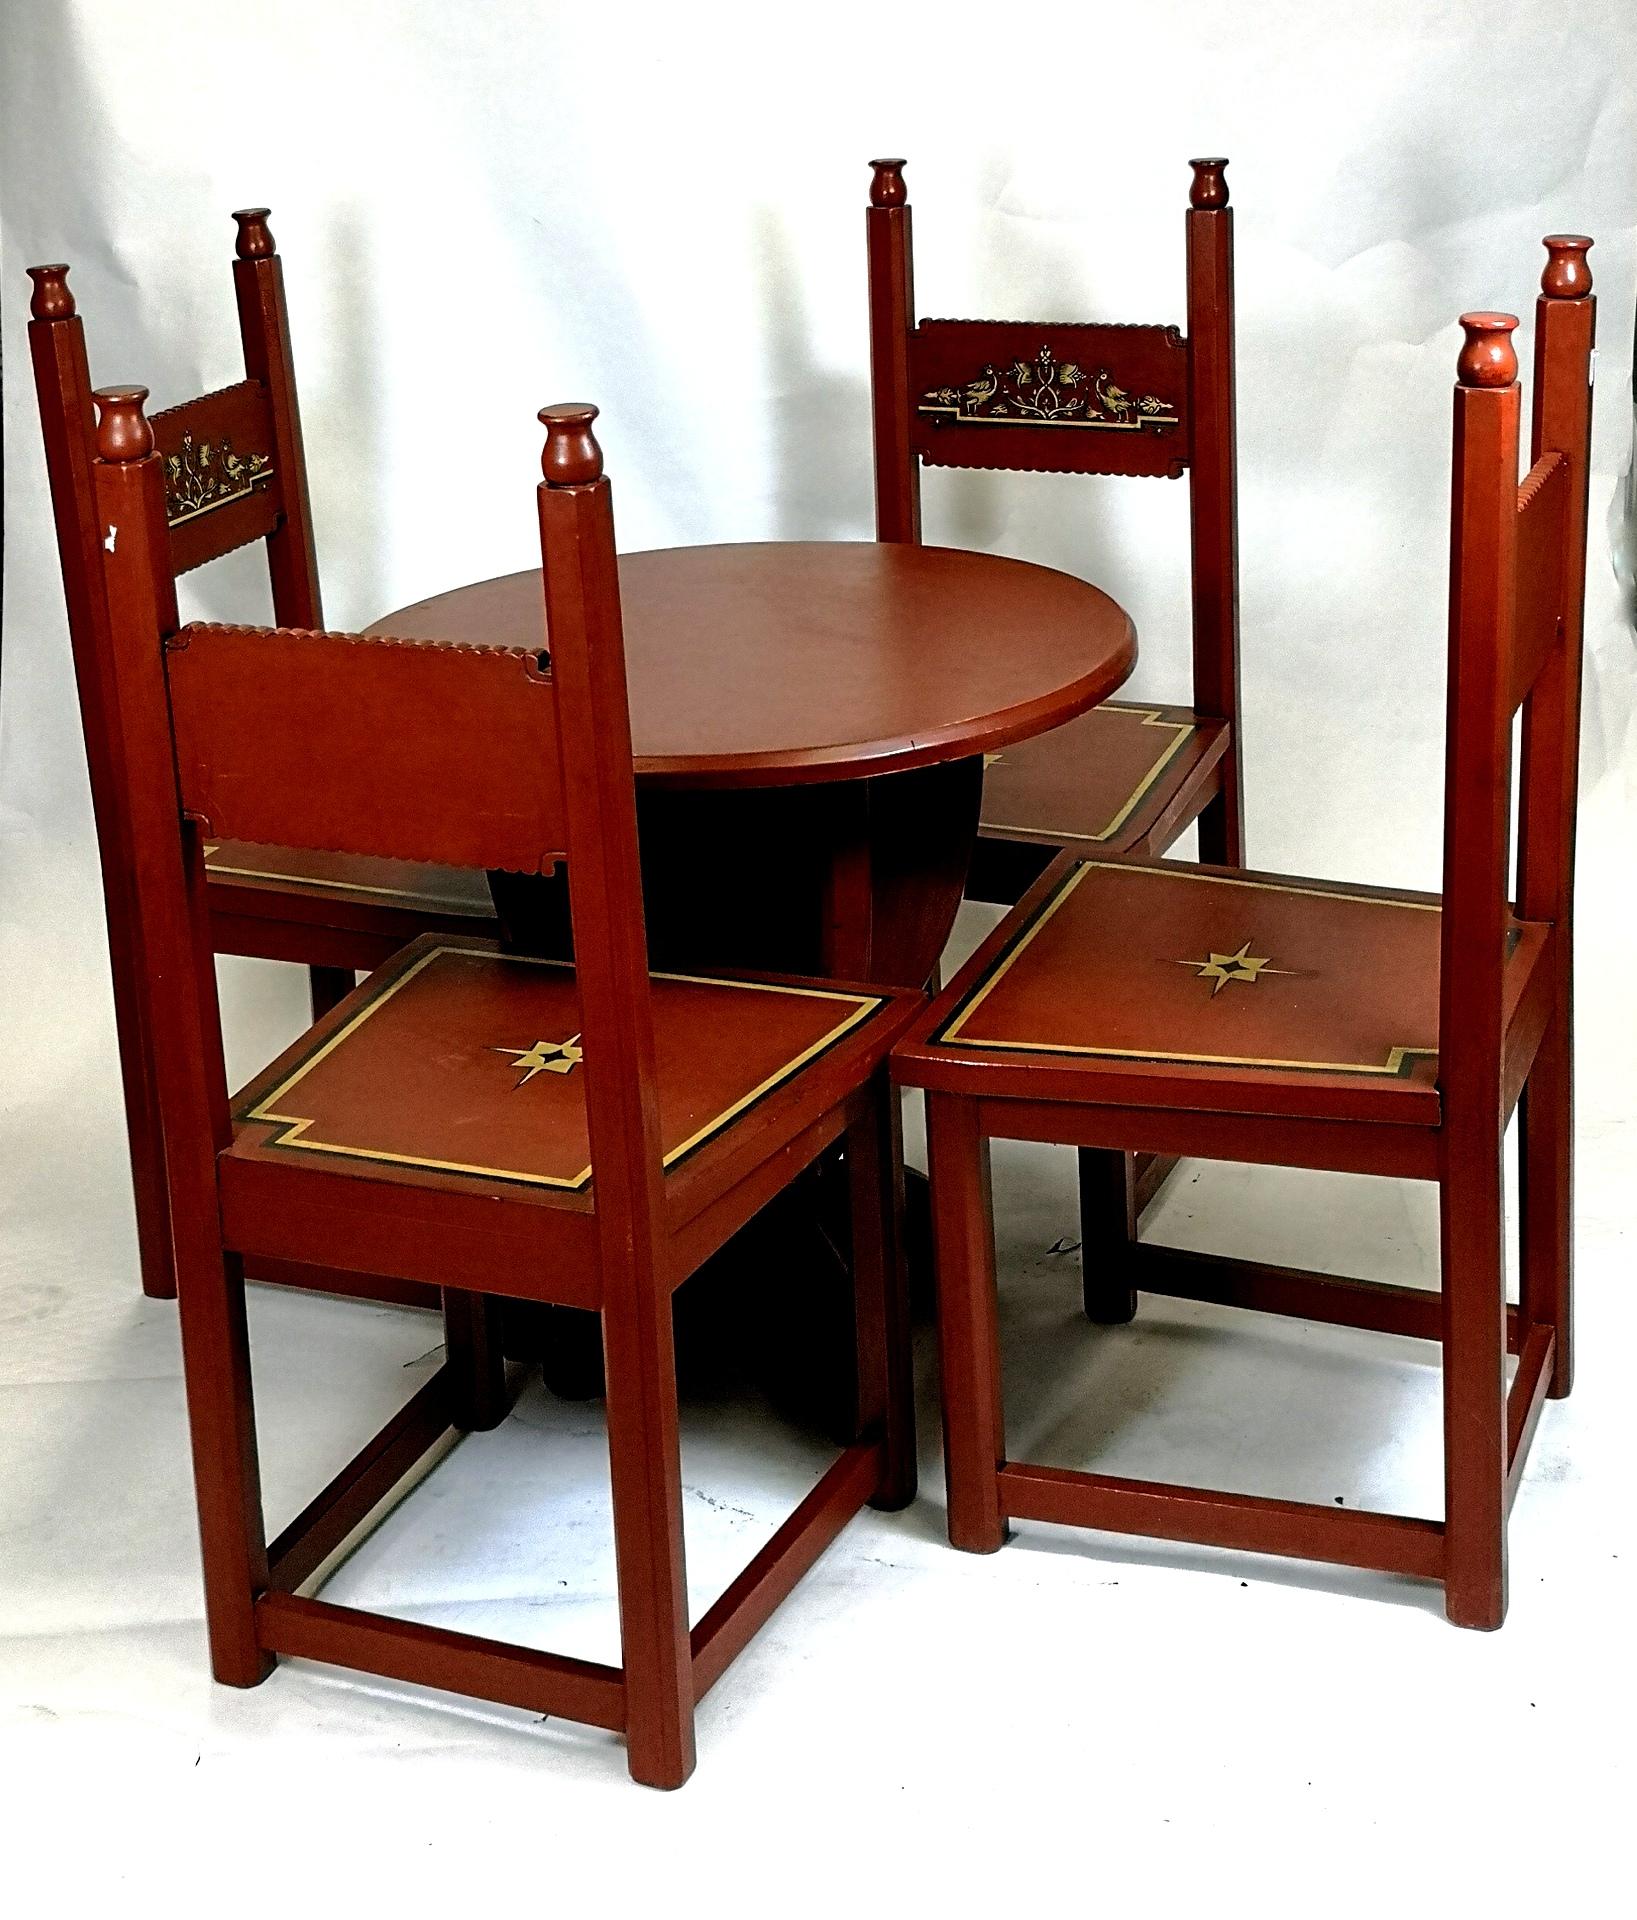 This Hungarian, Art Deco piece is a hand painted, handmade wooden dining table, with matching four chairs. From the 1930s, in good condition.